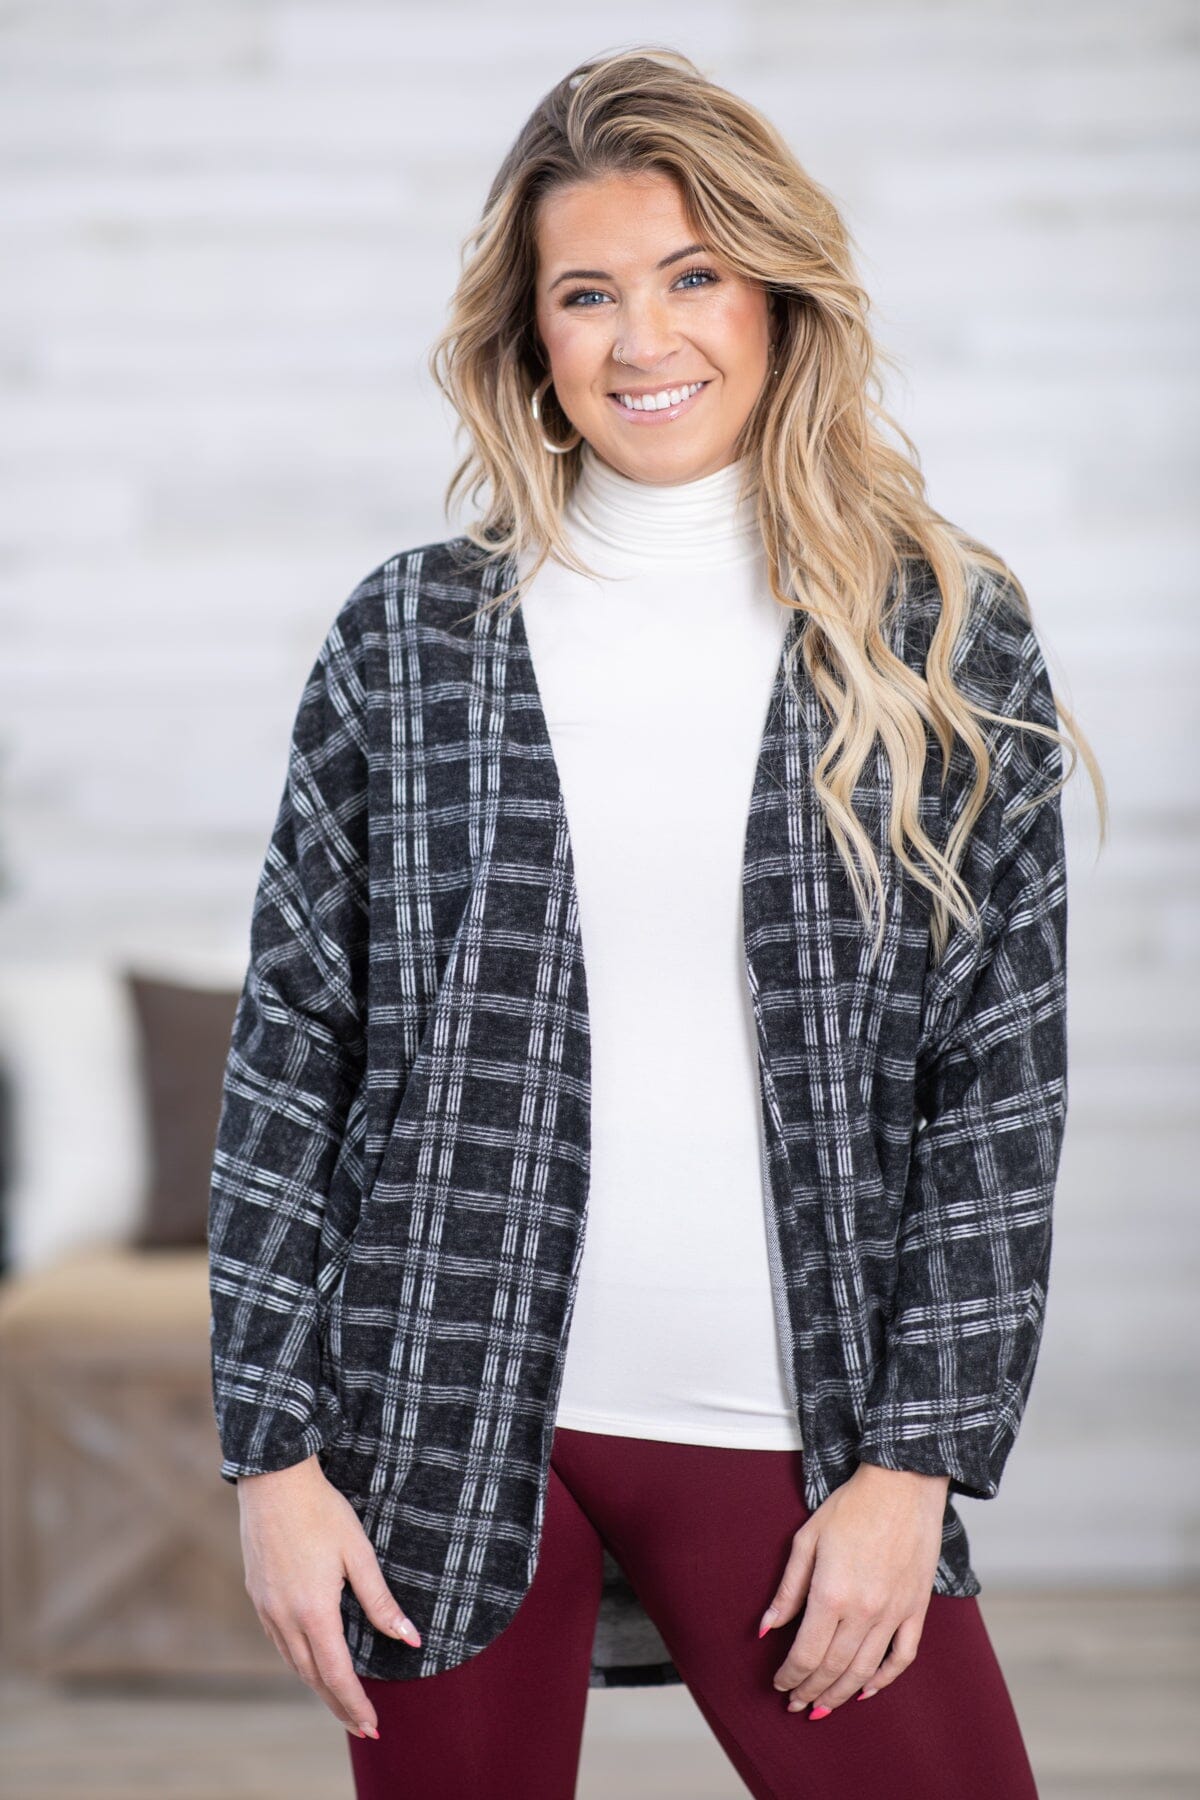 Off White and Black Plaid Cocoon Cardigan - Filly Flair